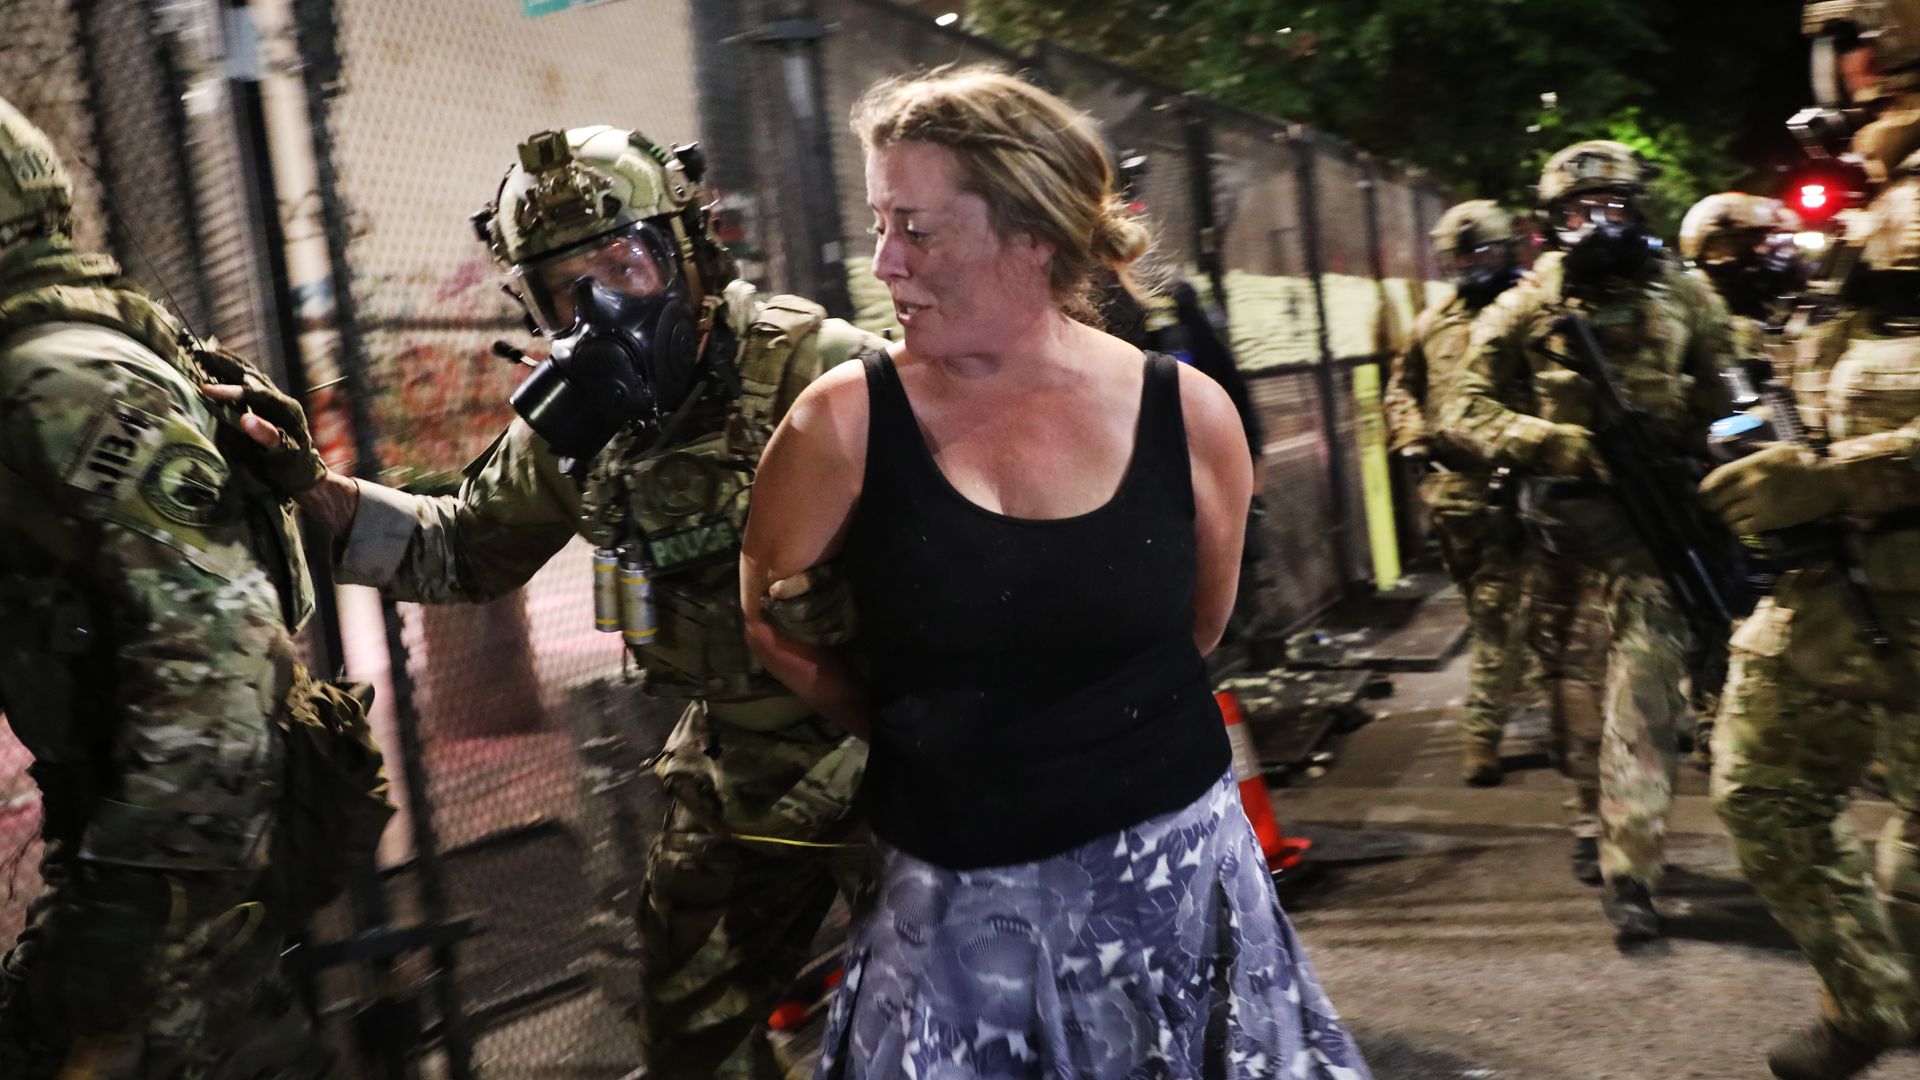 Federal police make an arrest as they confront protesters in front of the  federal courthouse in downtown Portland as the city experiences another night of unrest on July 26, 2020 in Portland, Oregon.